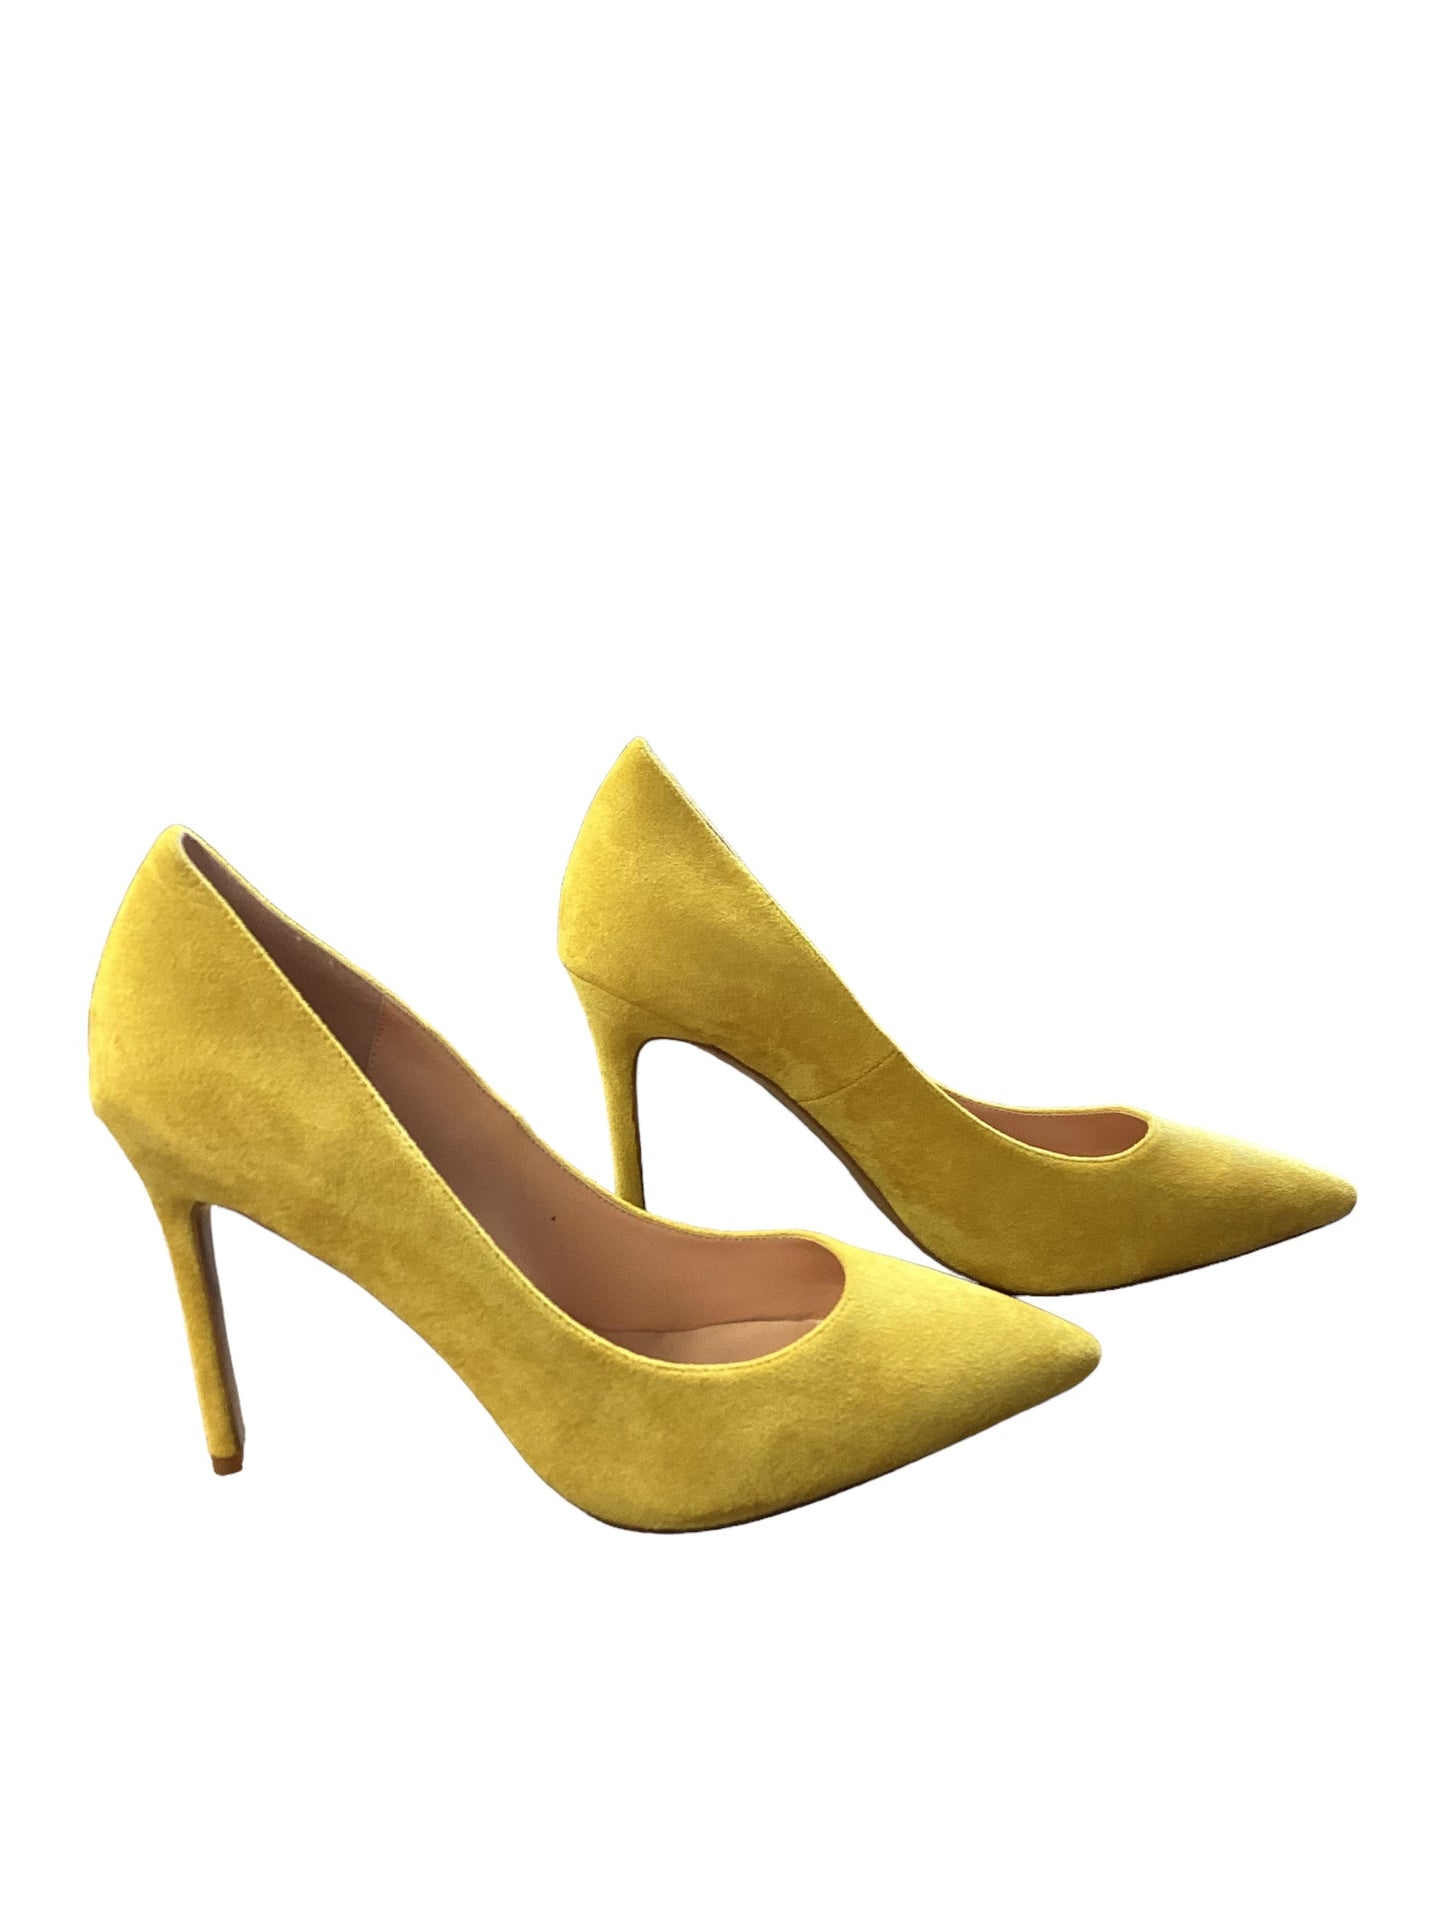 Yellow Shoes Heels Stiletto Clothes Mentor, Size 11